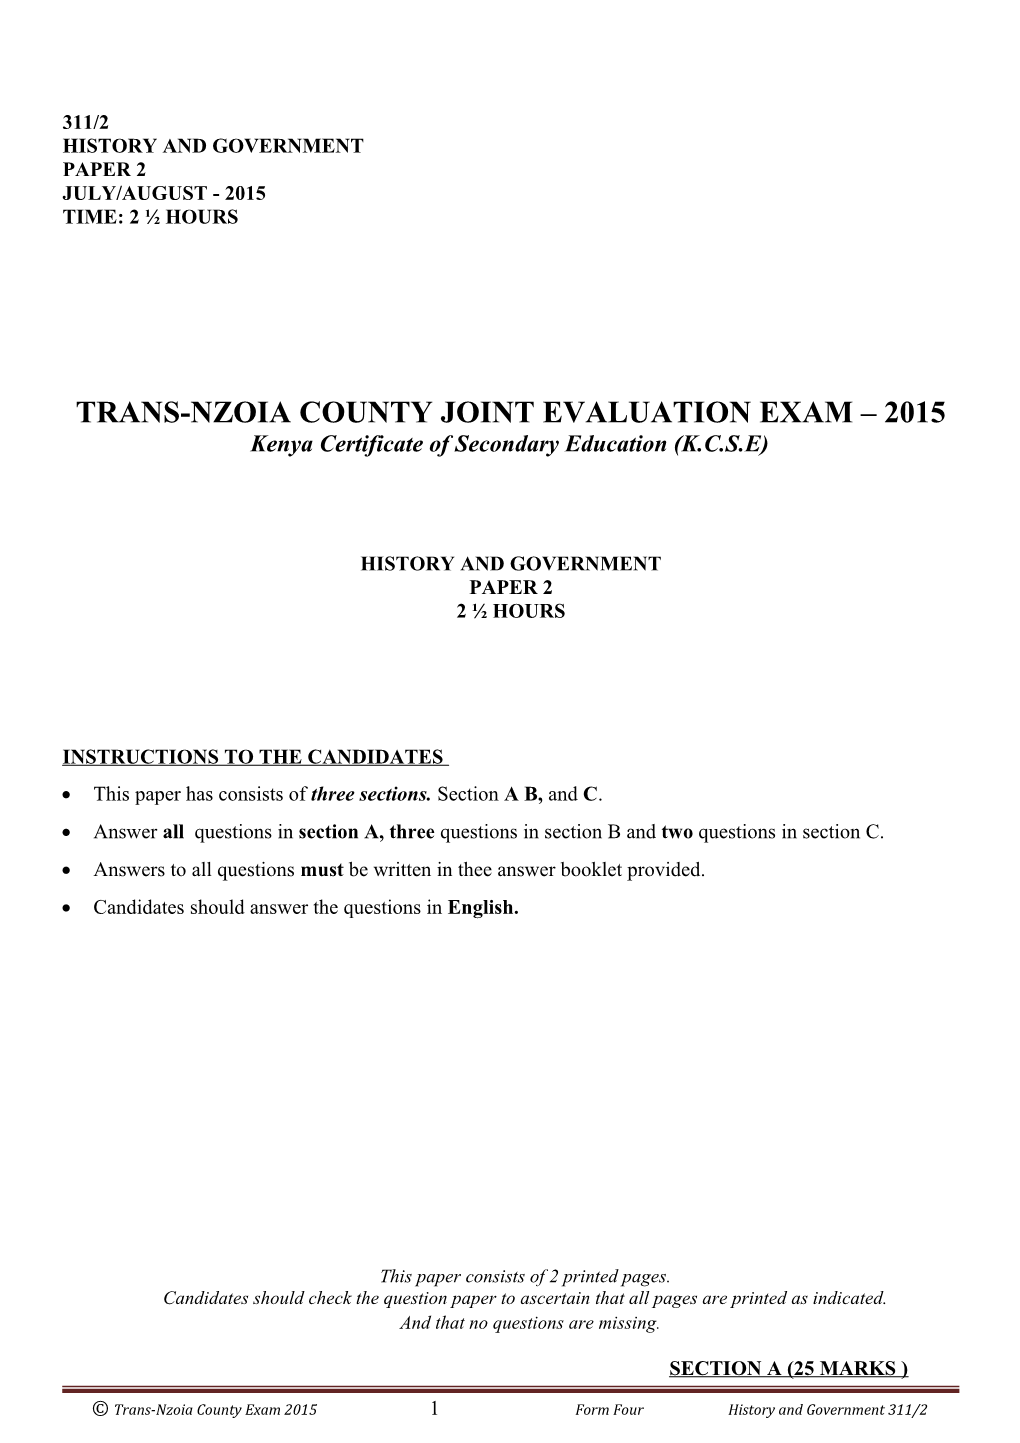 Trans-Nzoia County Joint Evaluation Exam 2015 s1